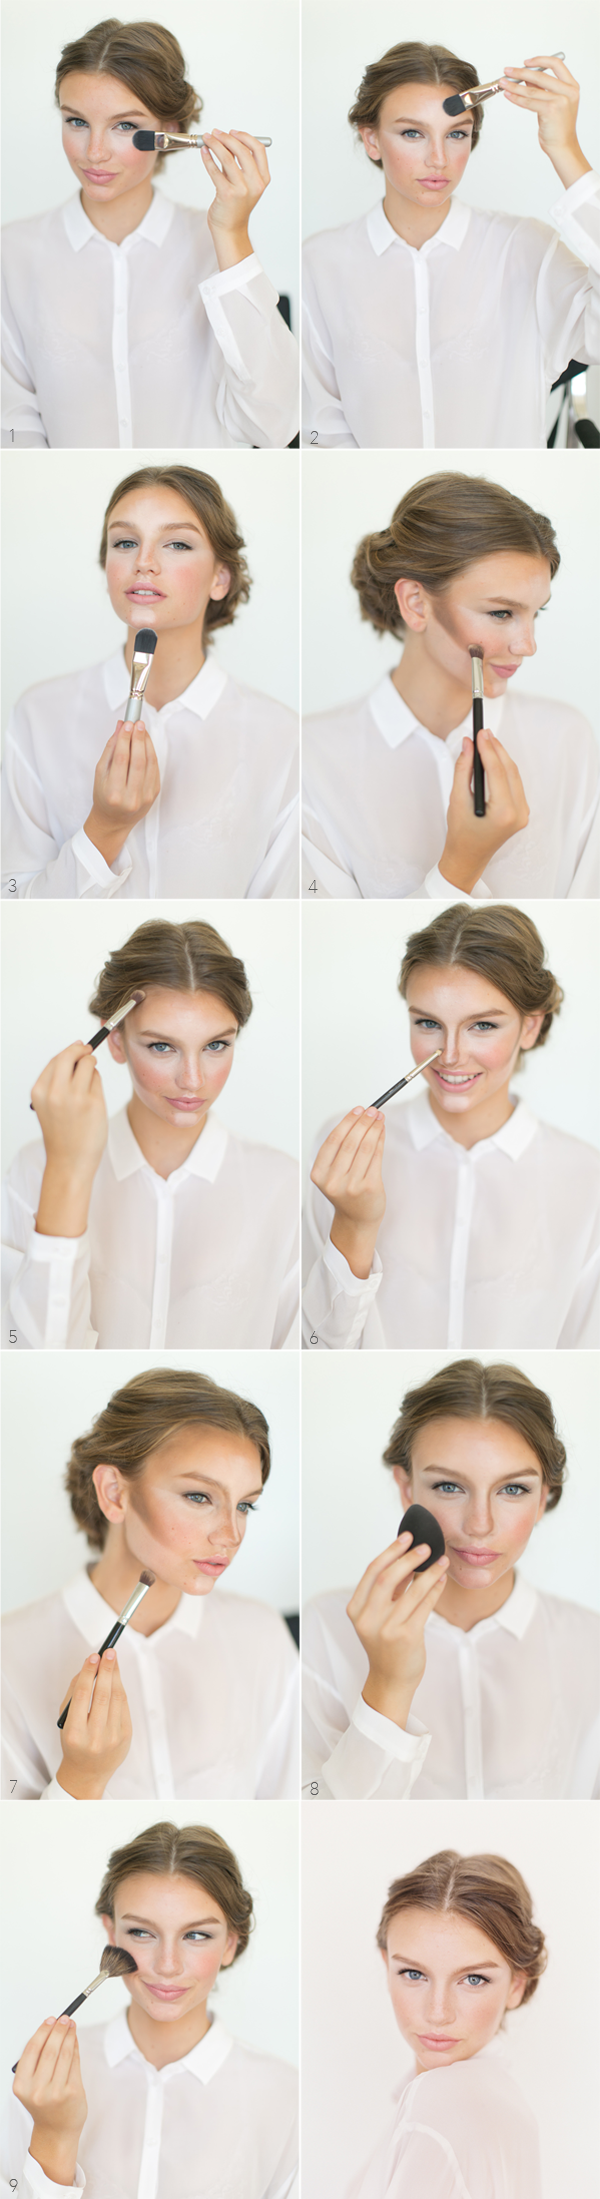 Amazing Makeup Tutorials To Take Your Beauty To The Next Level